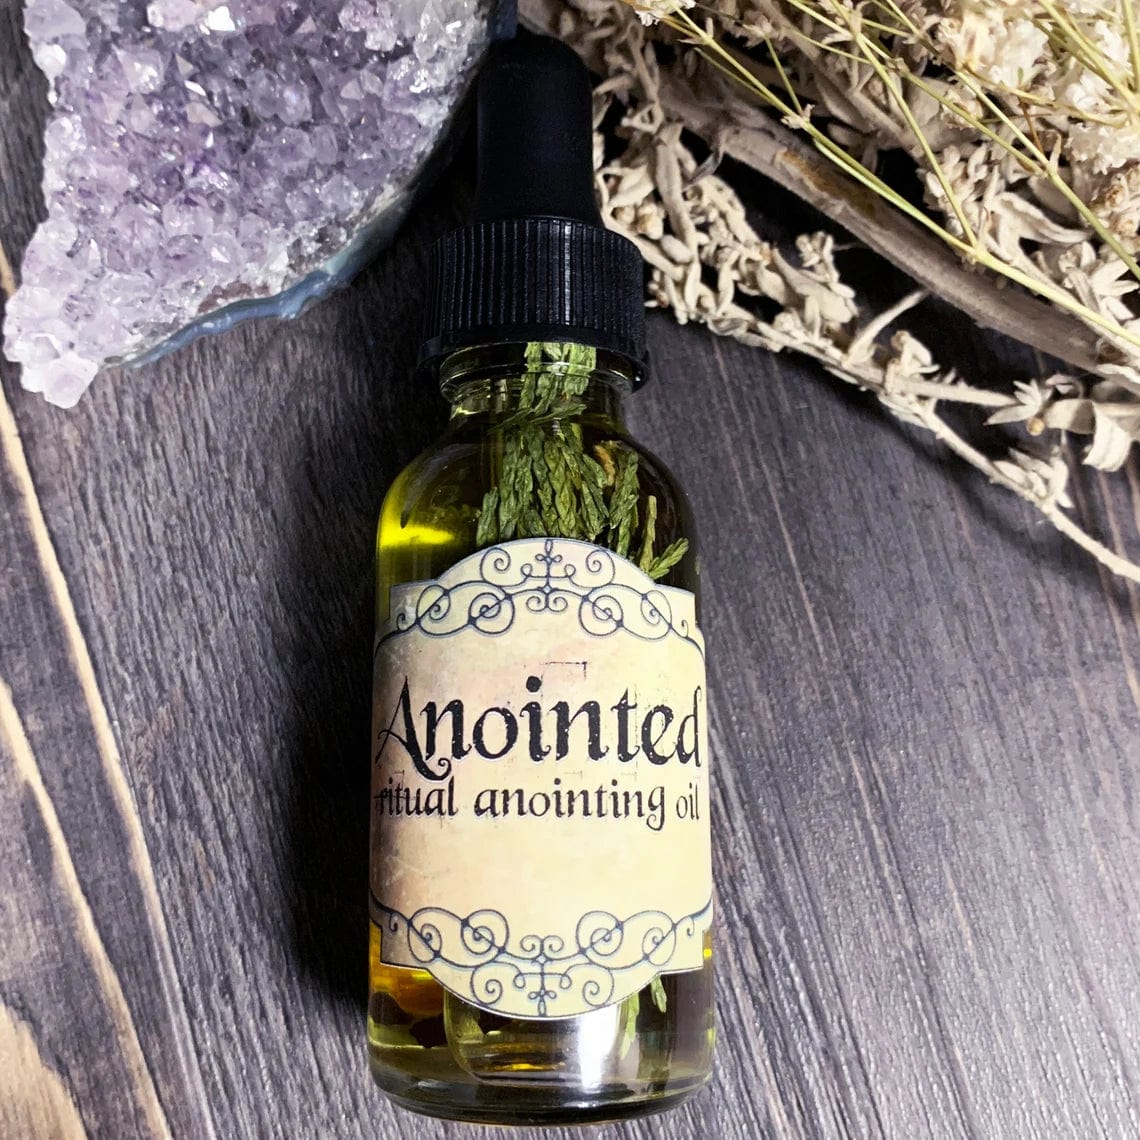 ritual oil available in anointed 